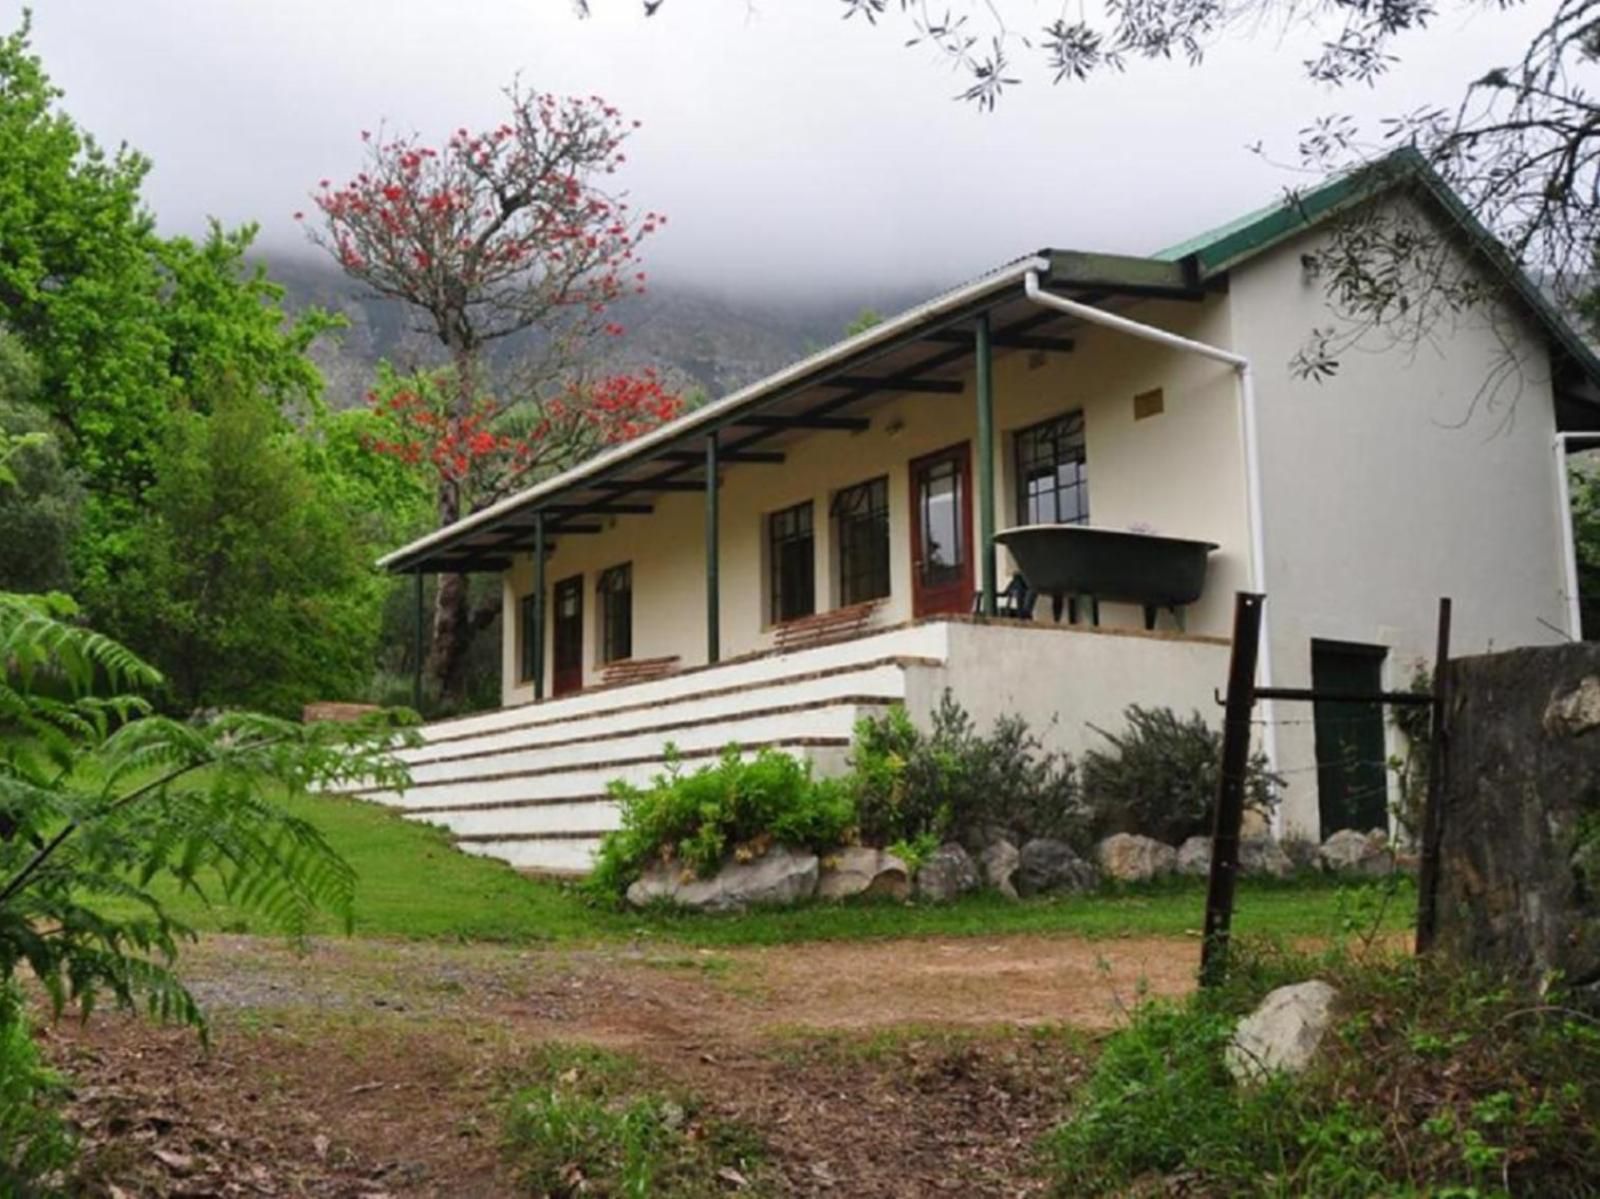 Kierie Kwaak Self Catering Cottages Stellenbosch Western Cape South Africa House, Building, Architecture, Highland, Nature